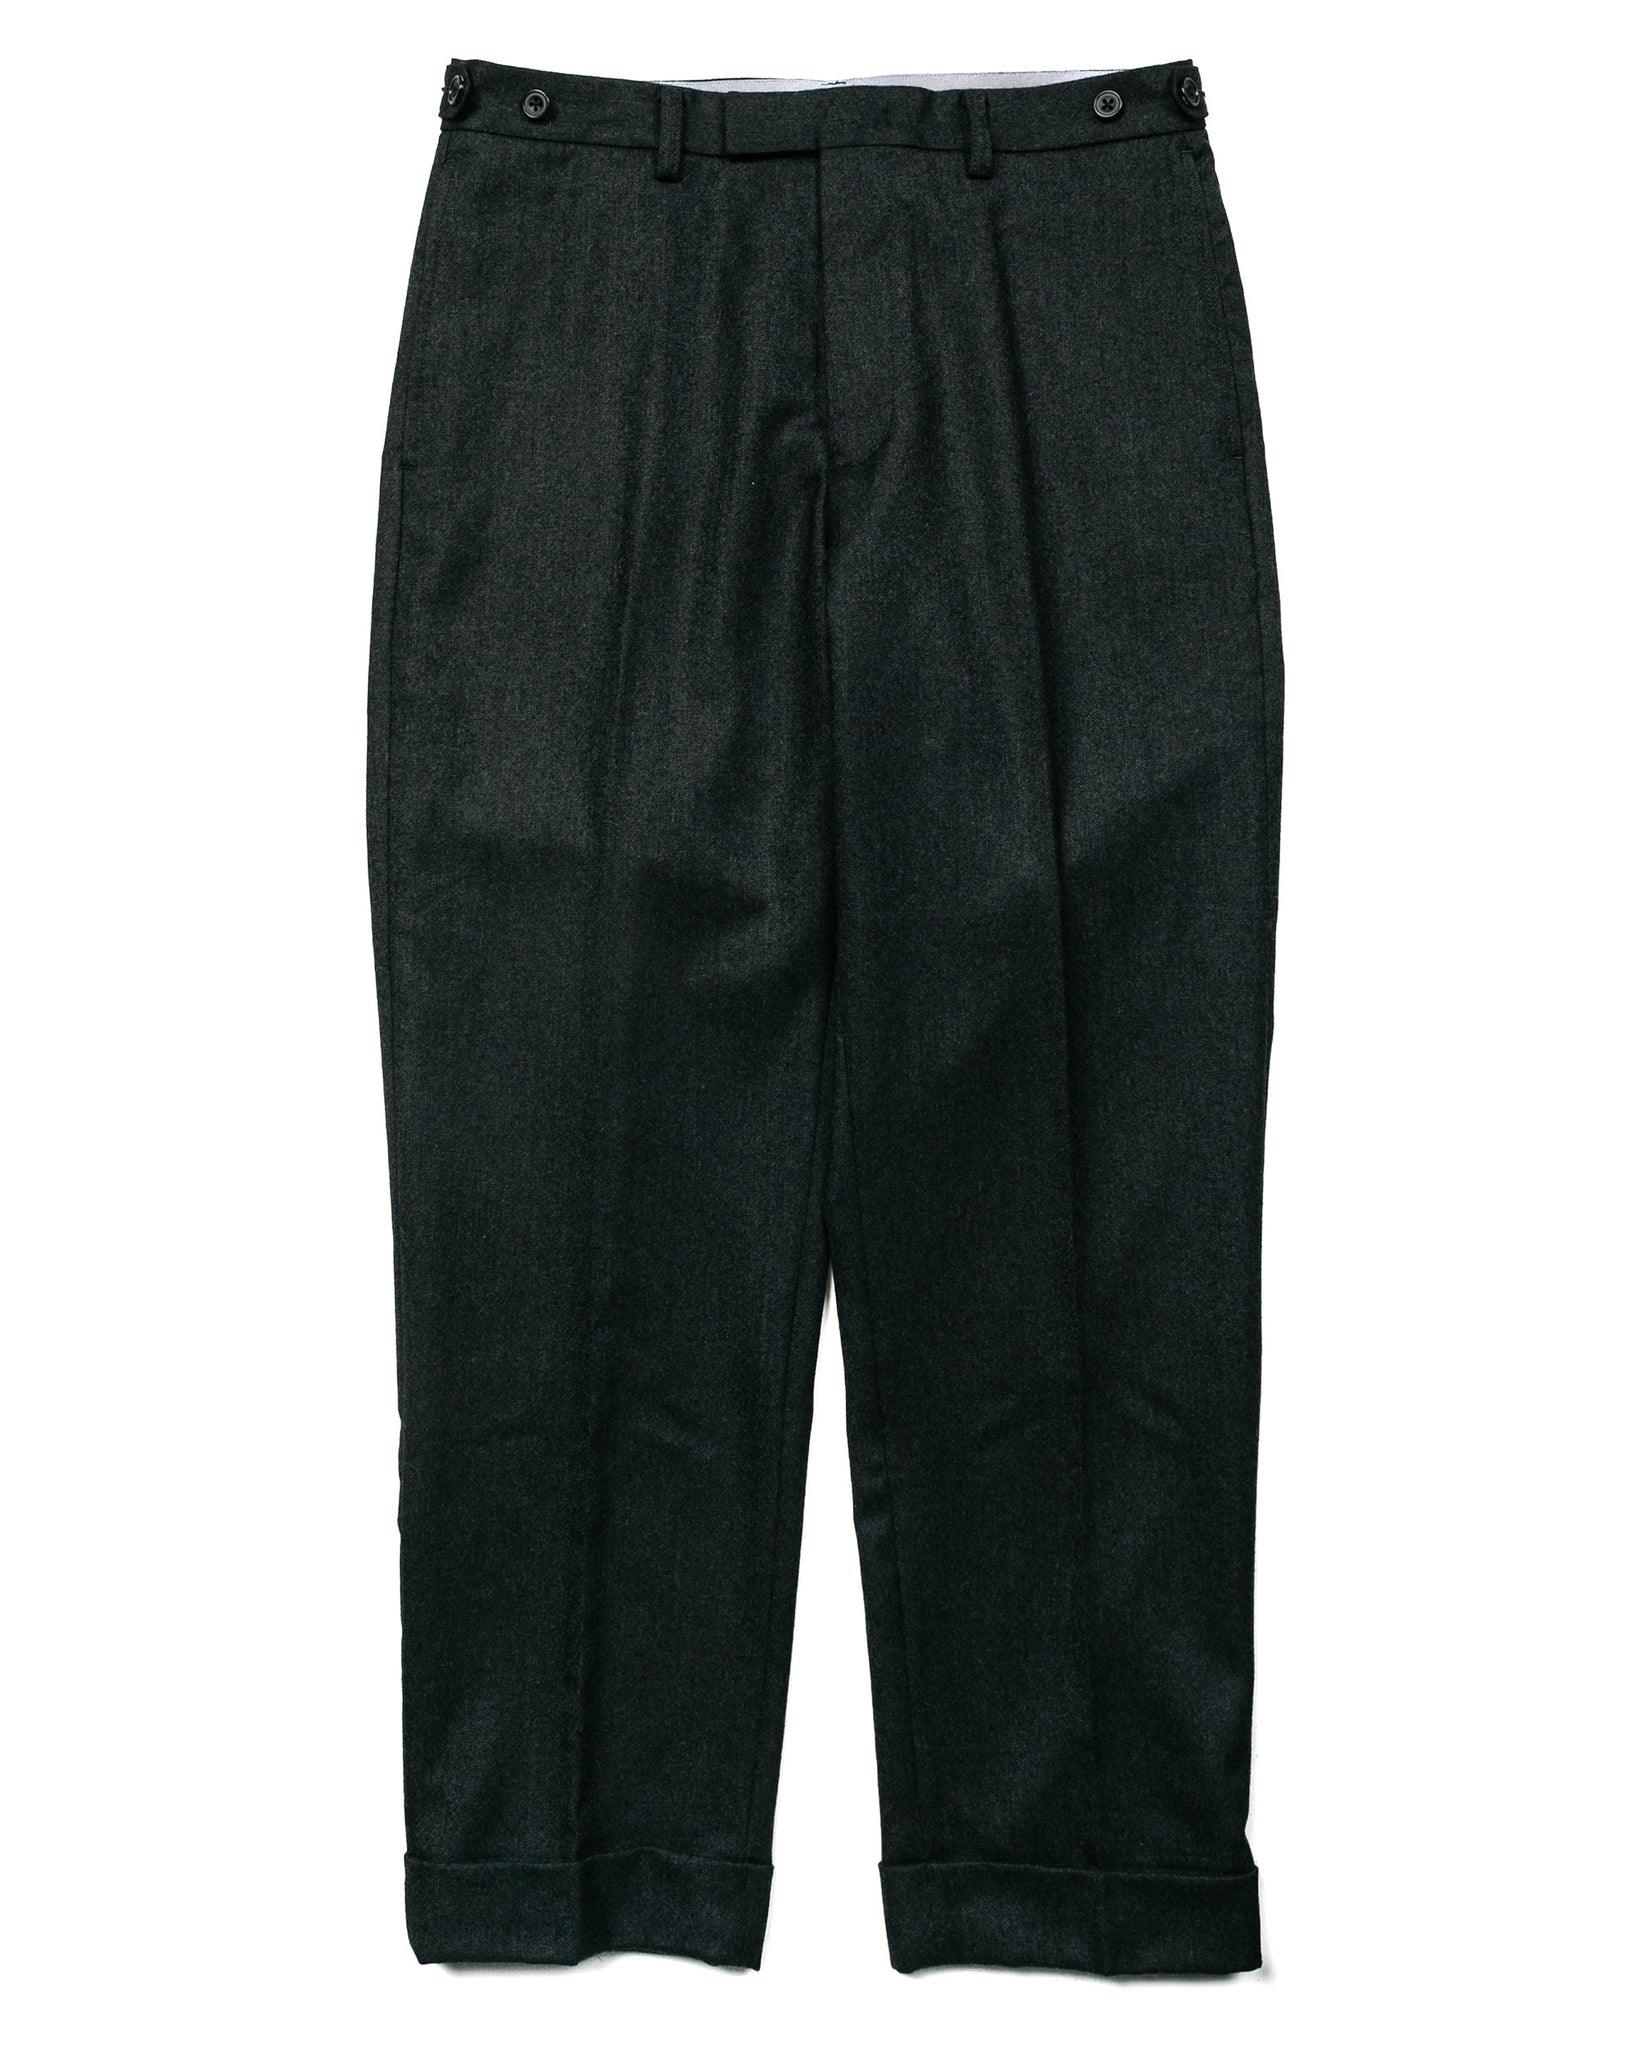 Beams Plus Ivy Trousers Ankle-Cut Flannel Charcoal Grey